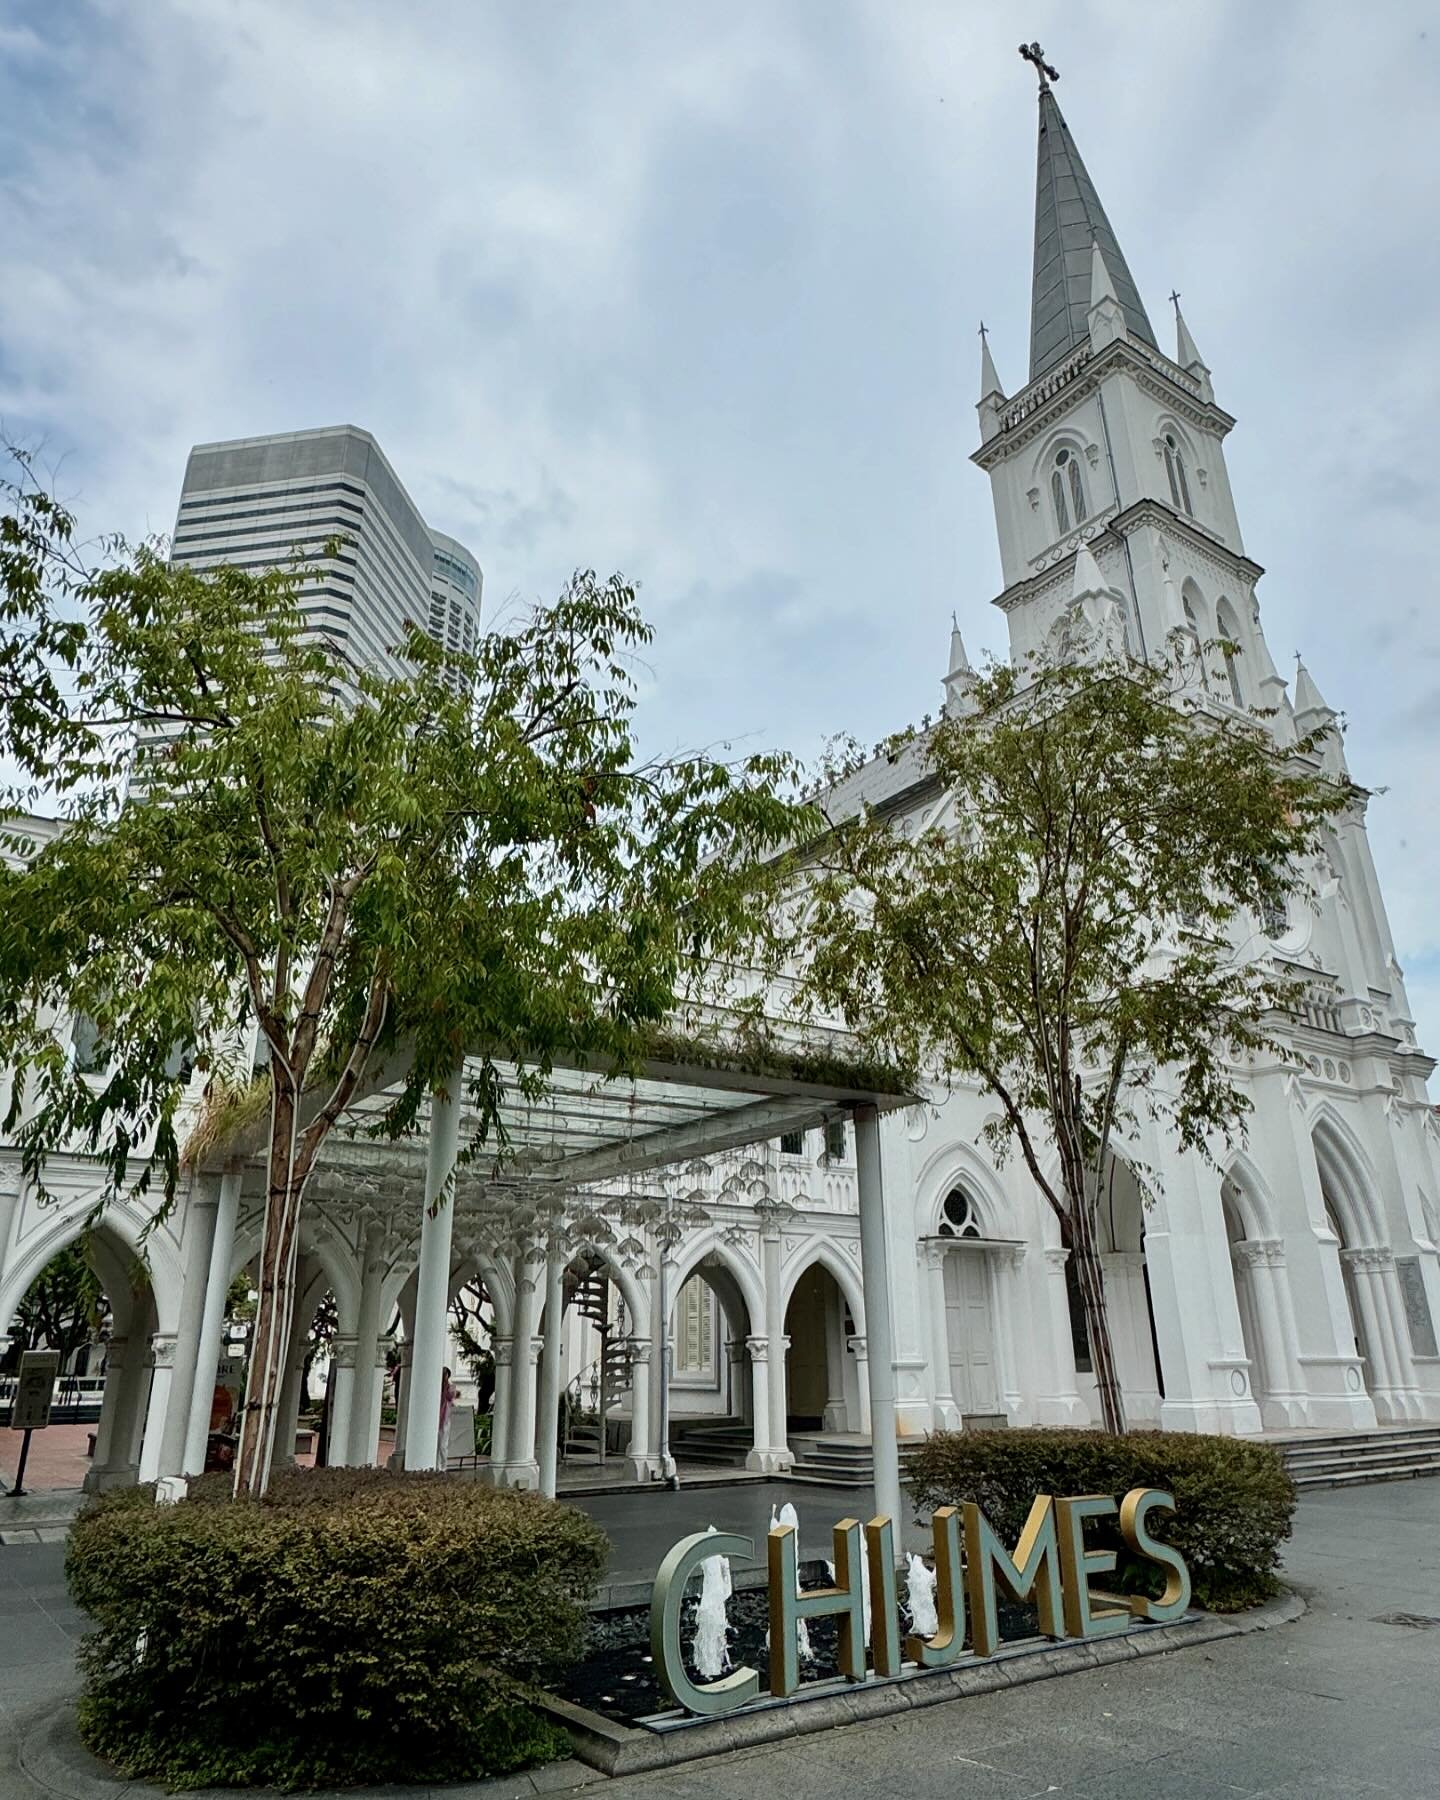 CHIJMES (pronounced &ldquo;chimes&rdquo;, acronym definition: Convent of the Holy Infant Jesus Middle Education School) The historic building complex began life as a Catholic convent known as the Convent of the Holy Infant Jesus (CHIJ). It now calls 